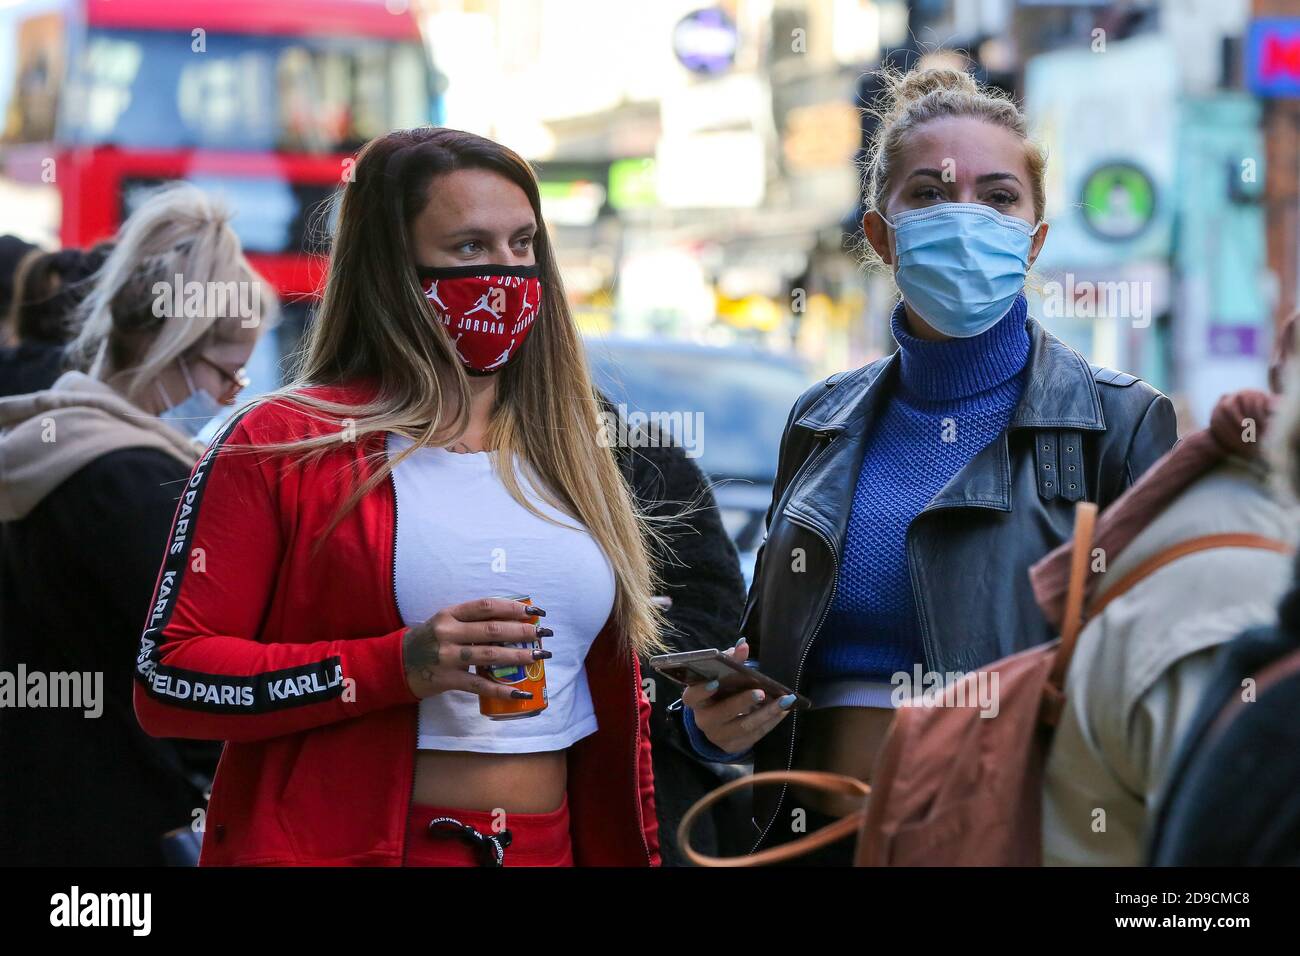 Shoppers wearing face masks queuing outside a departmental store in London as all non-essential retailers will close from midnight tonight, for a month.This follows the announcement by the Prime Minister, Boris Johnson, of the second national lockdown in England from Thursday 5 November until Wednesday 2 December, to control the increase of coronavirus cases. Stock Photo